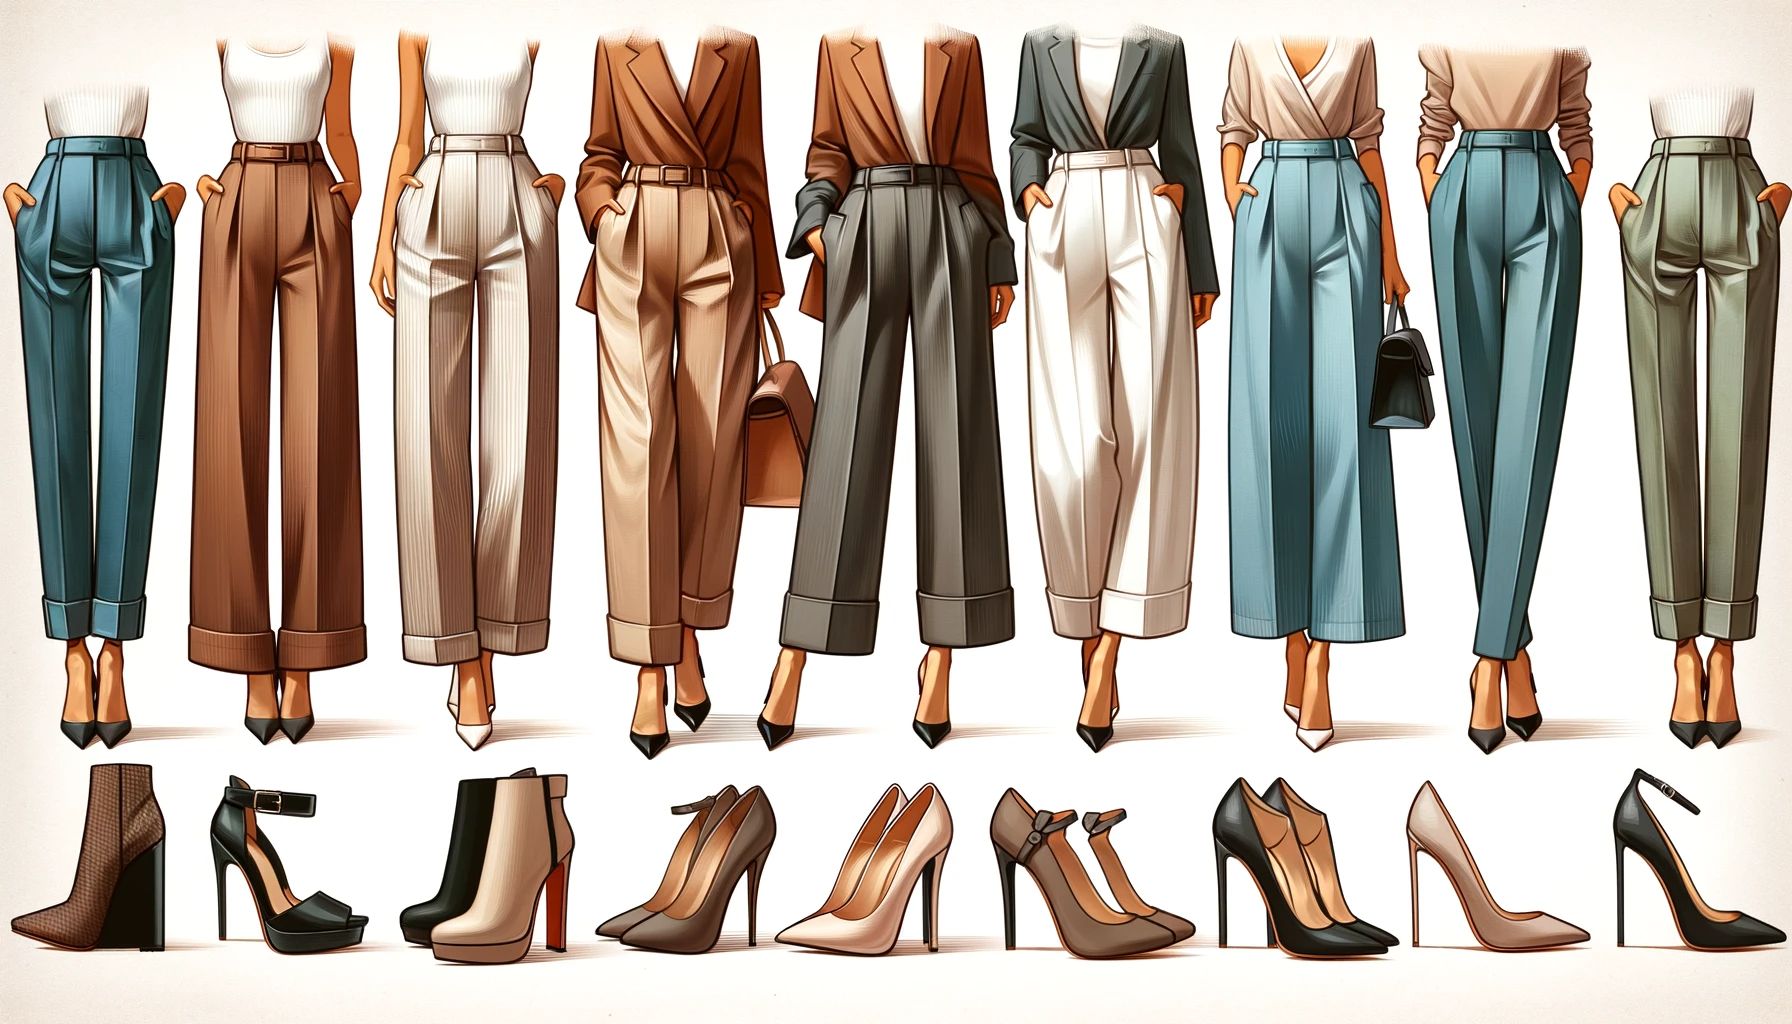  a variety of heels with wide leg pants